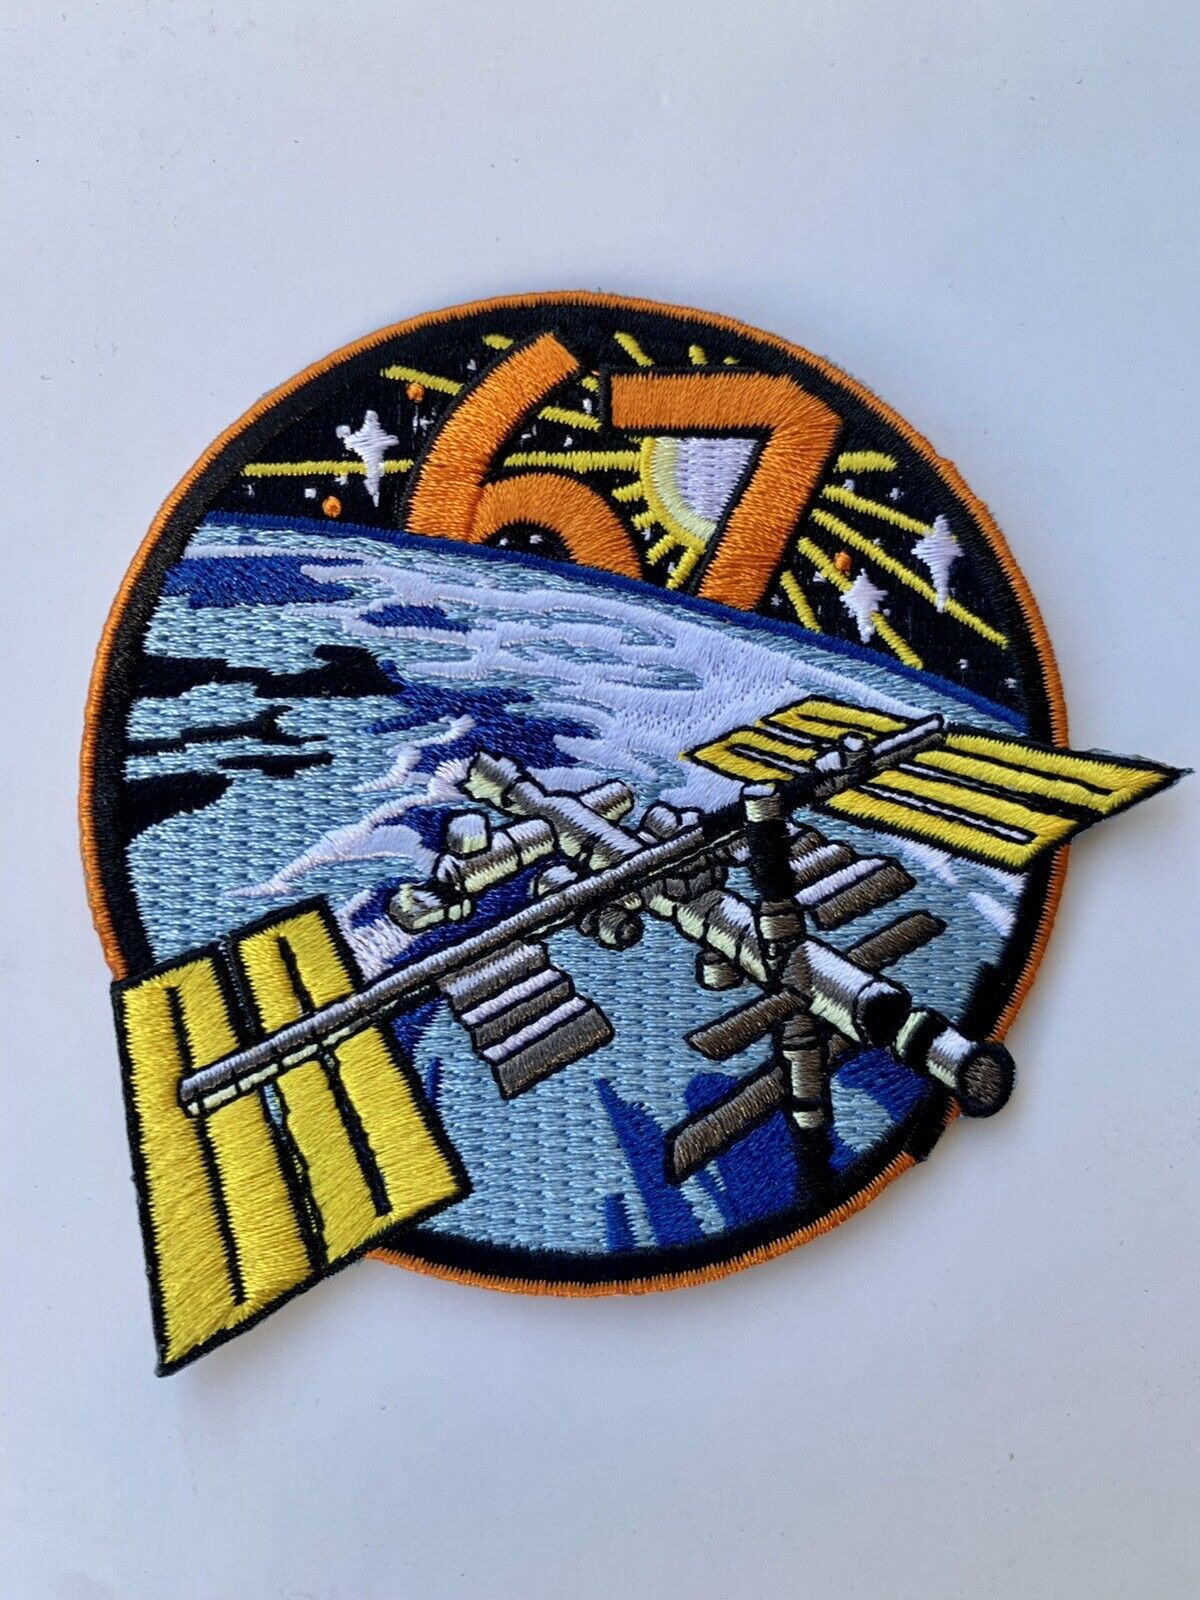 Original Spacex Esa Expedition 67 Iss Crew 4 Mission Patch Dragon Falcon 9